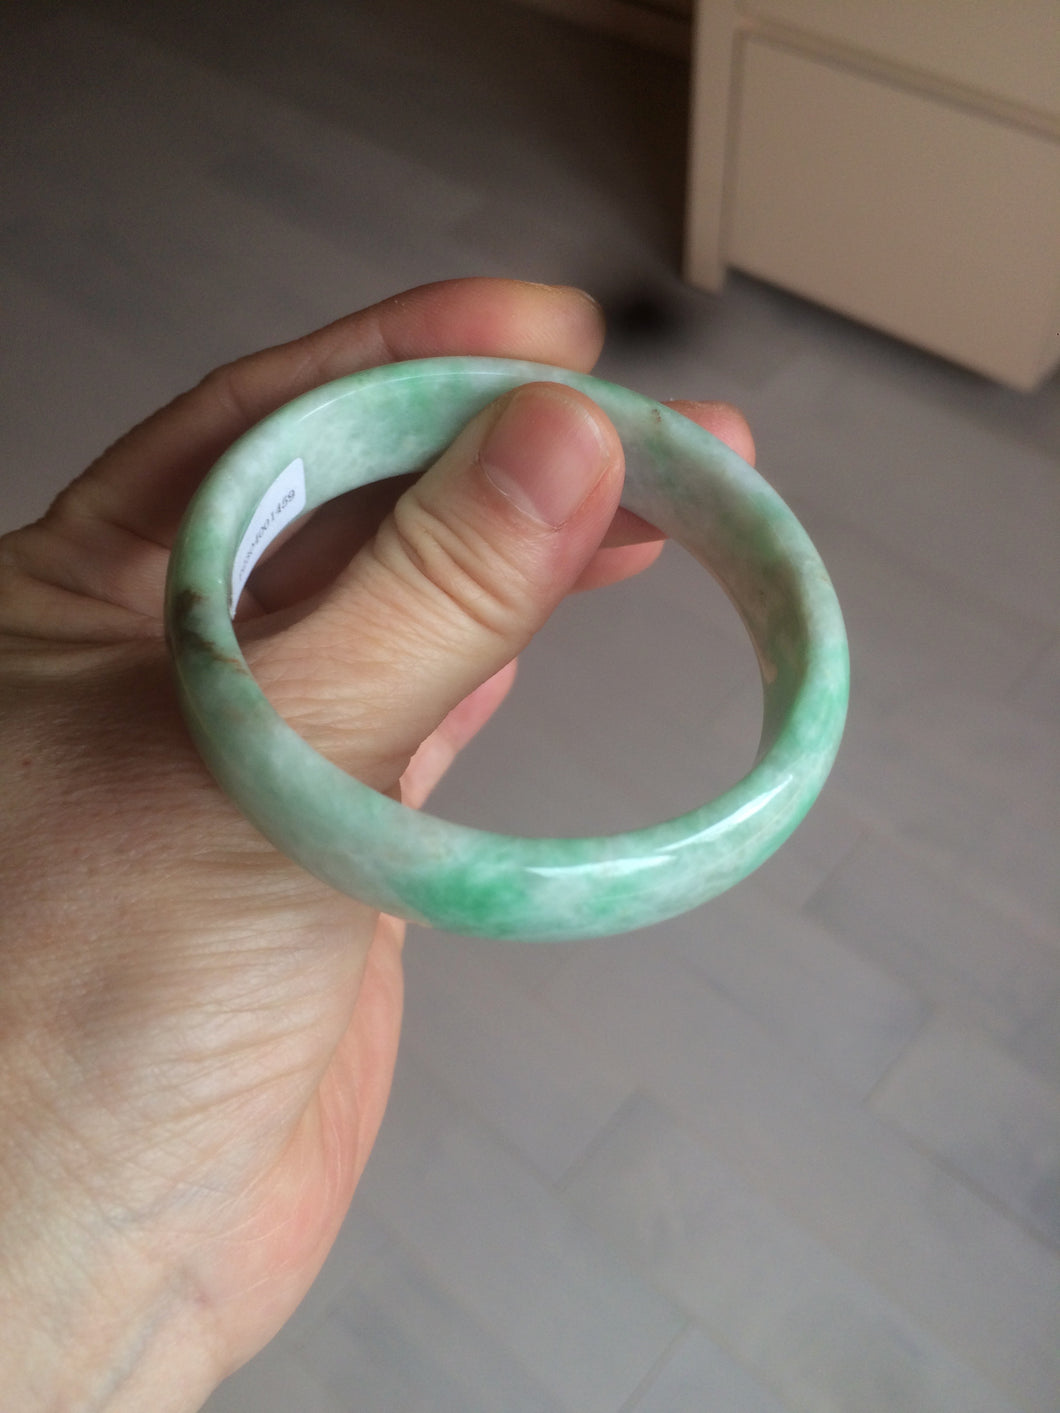 50.5mm Certified Type A 100% Natural sunny apple green/brown oval Jadeite Jade bangle AZ134-1459